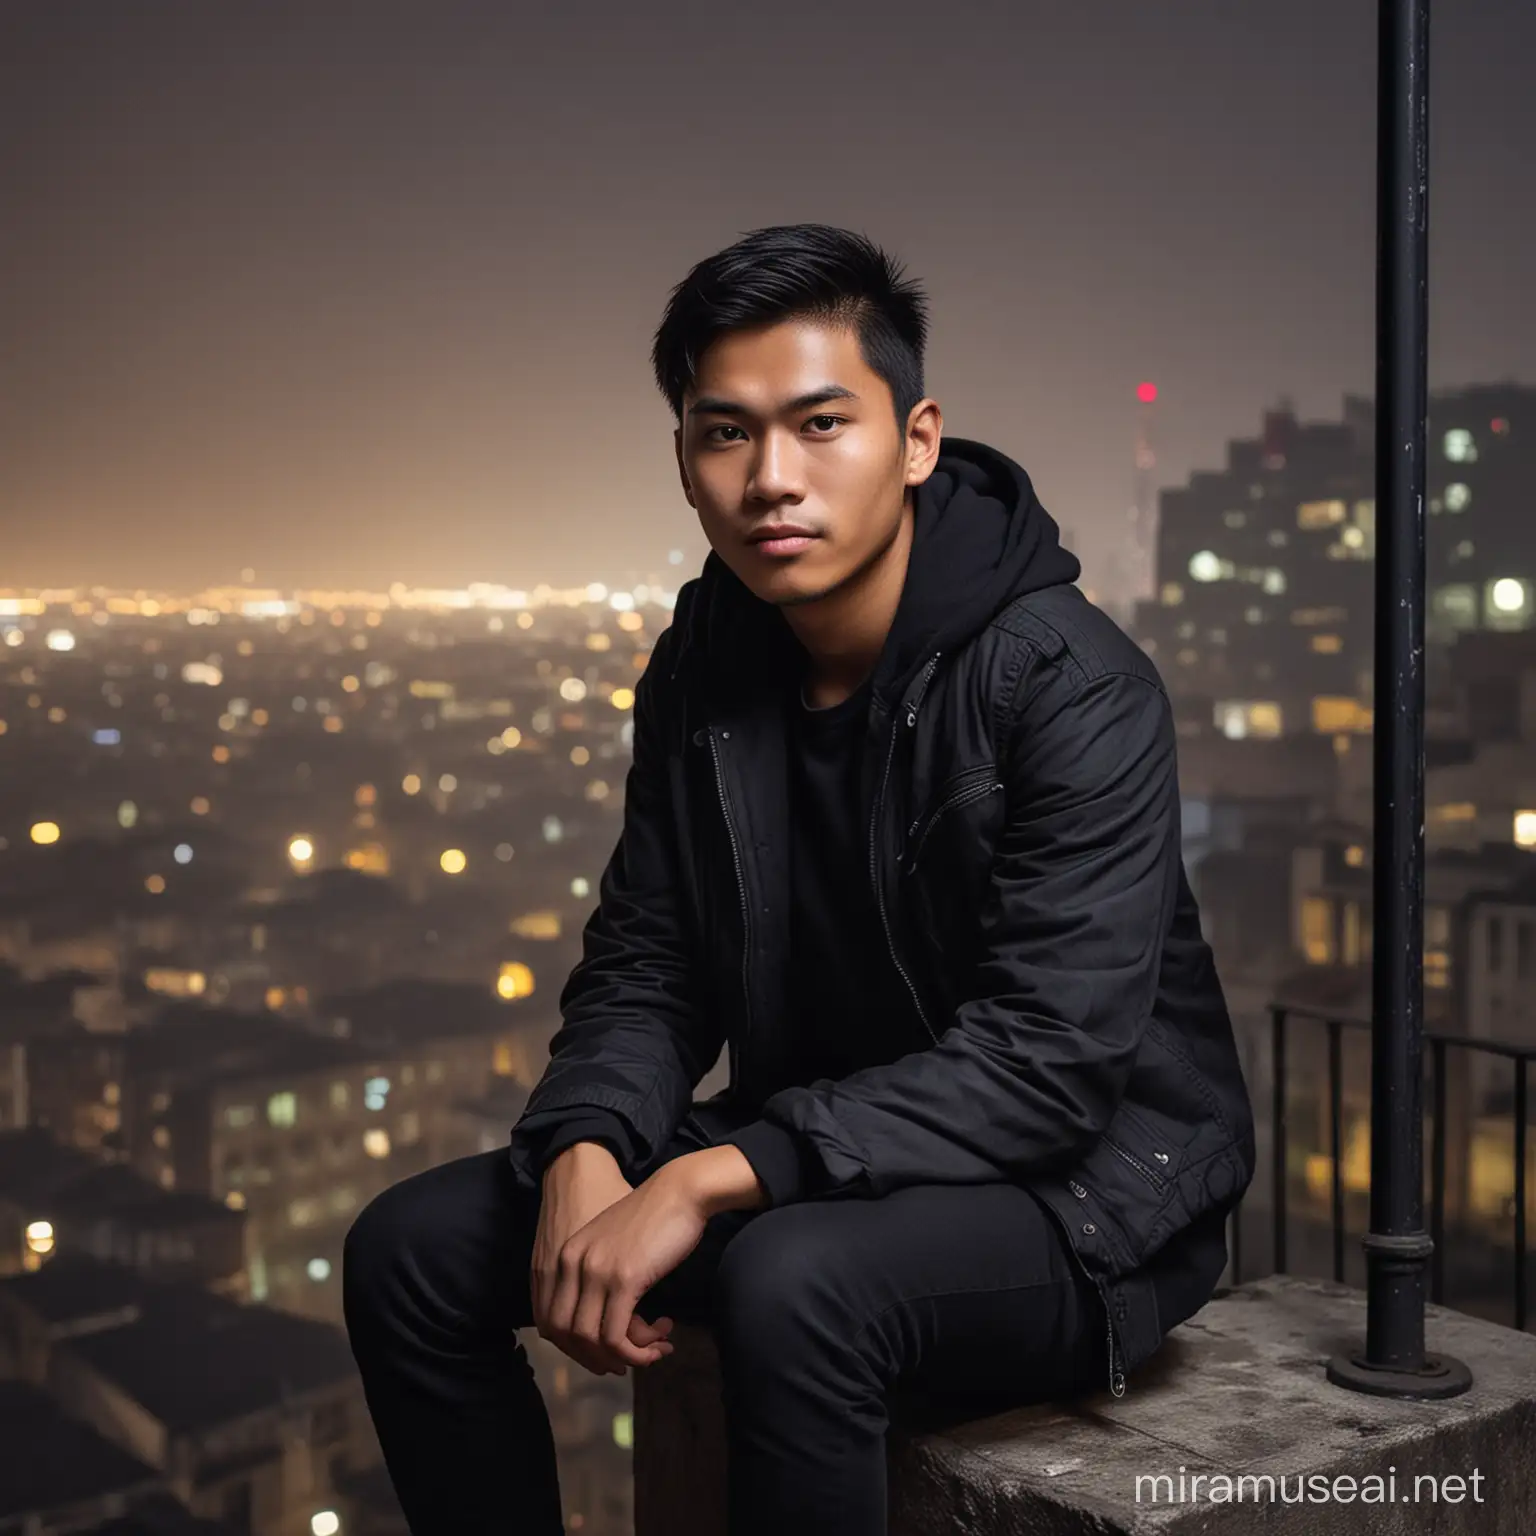 Young Indonesian Man Sitting in Eerie City Night